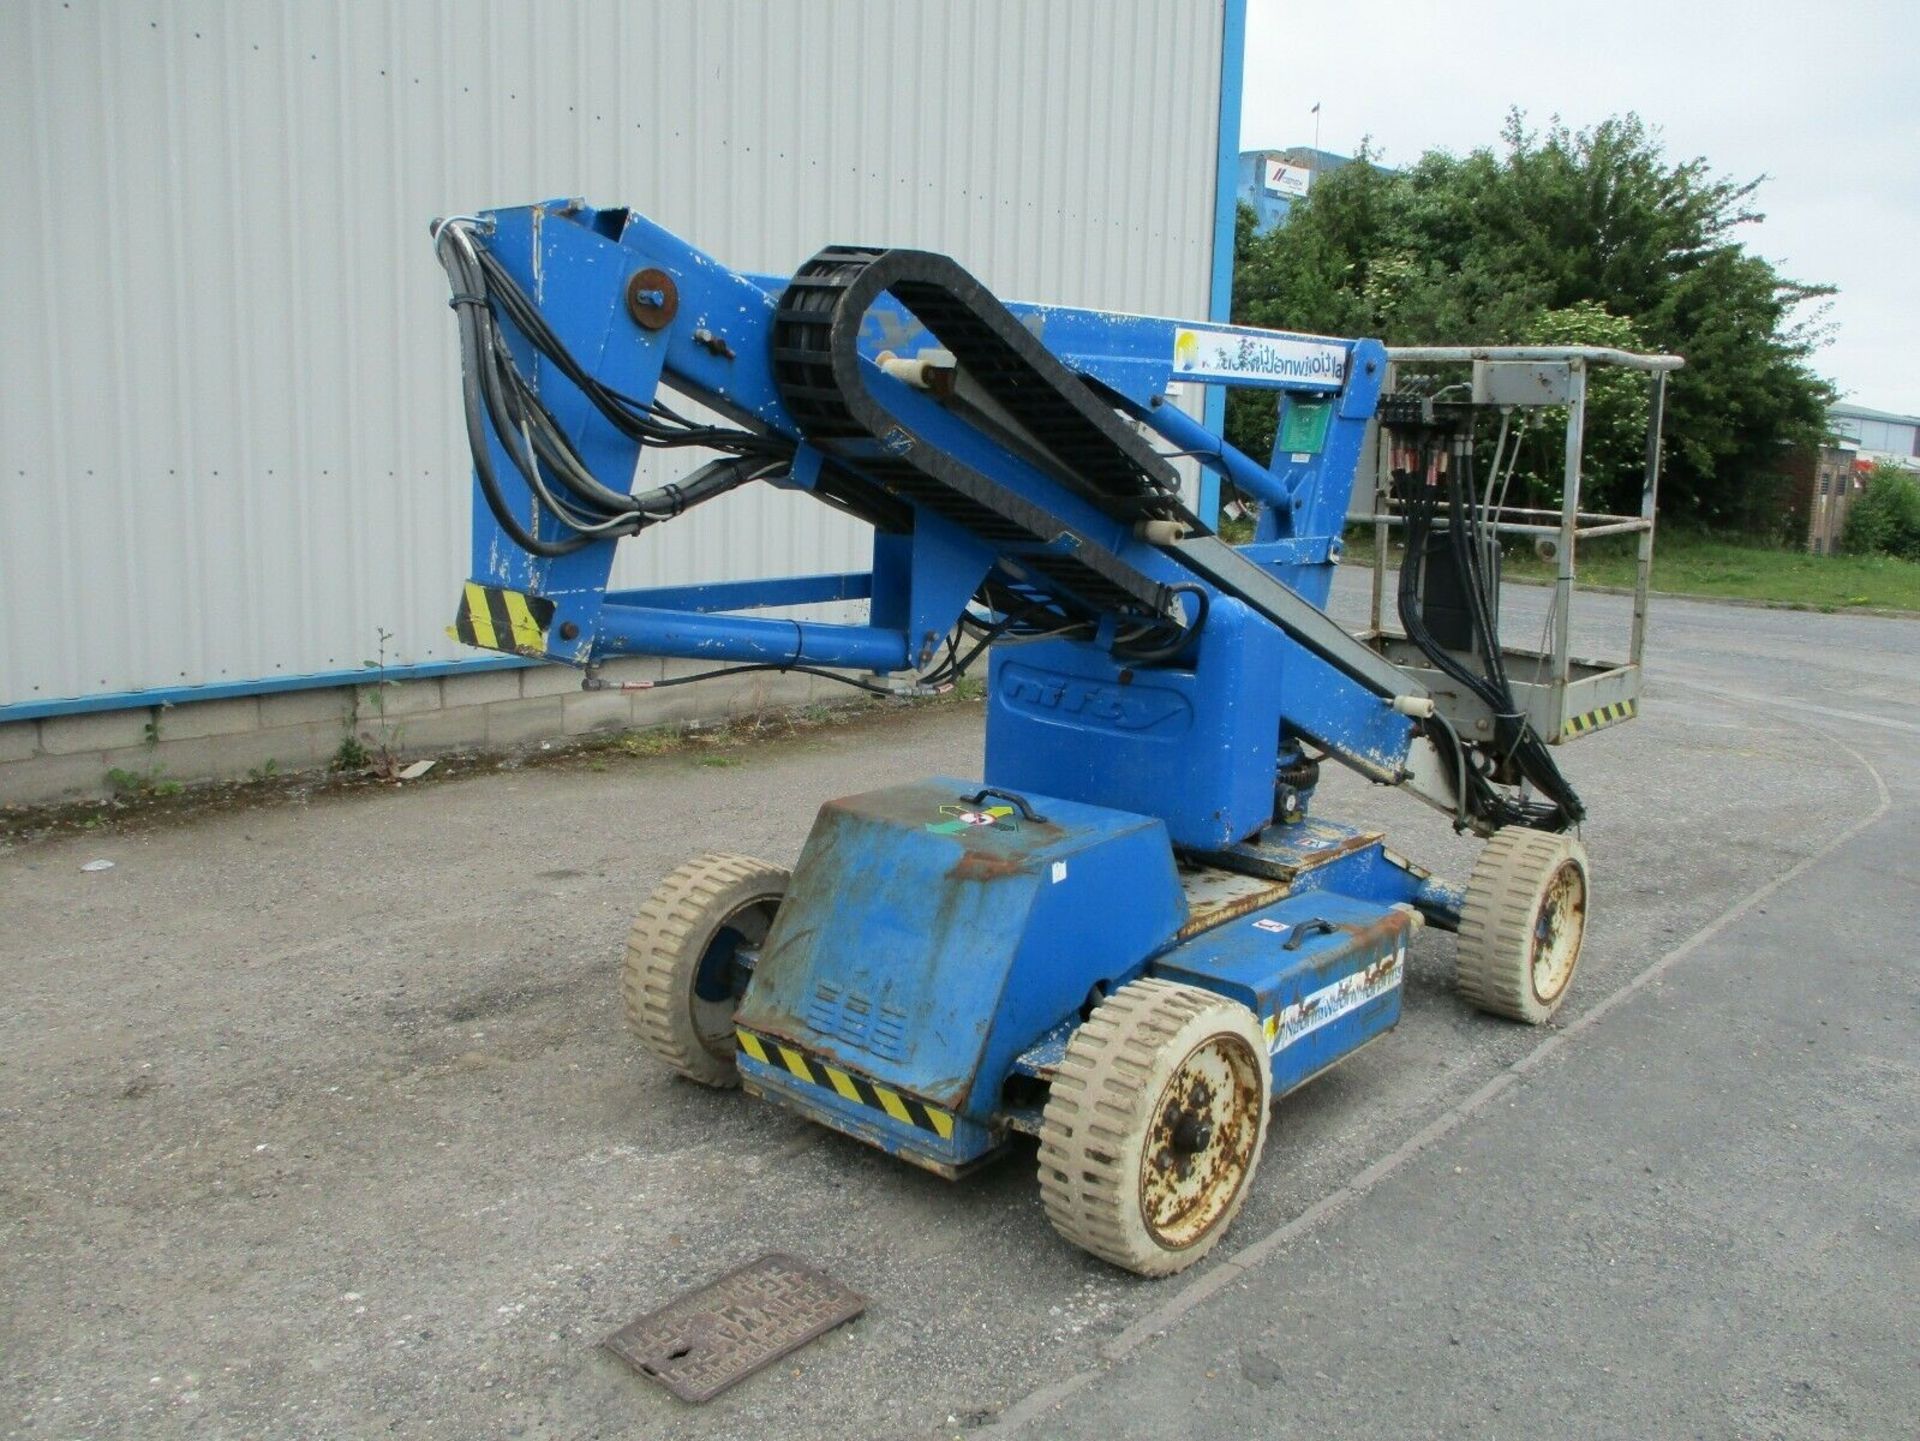 Nifty Lift HR12 Self Propelled Access Platform 2008 - Image 5 of 9